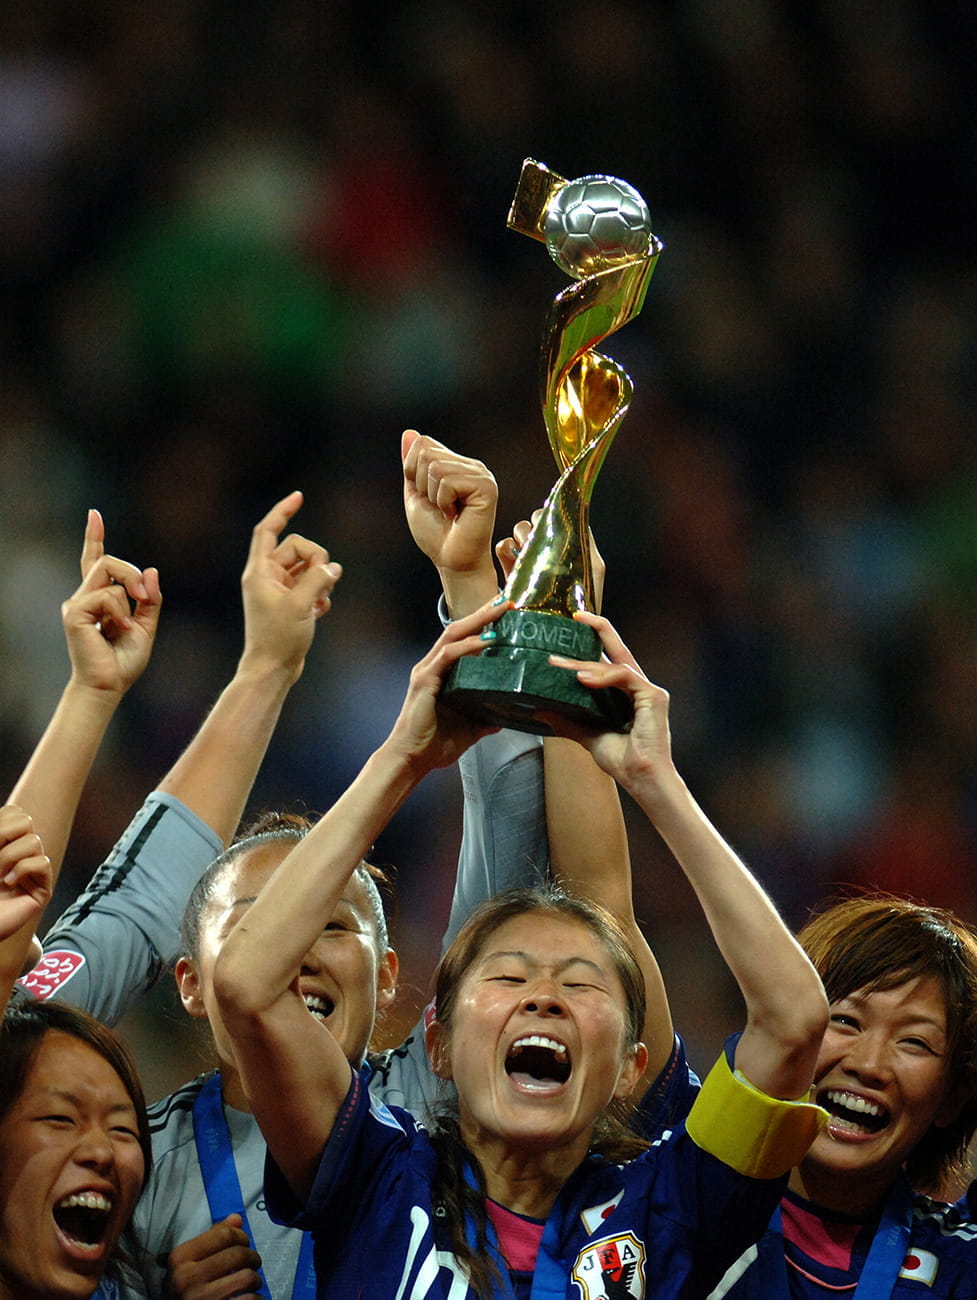 Japan’s victory at the 2011 FIFA Women’s World Cup in July, just months after the Tohoku earthquake, was a source of great encouragement and inspiration. ©Photo Kishimoto